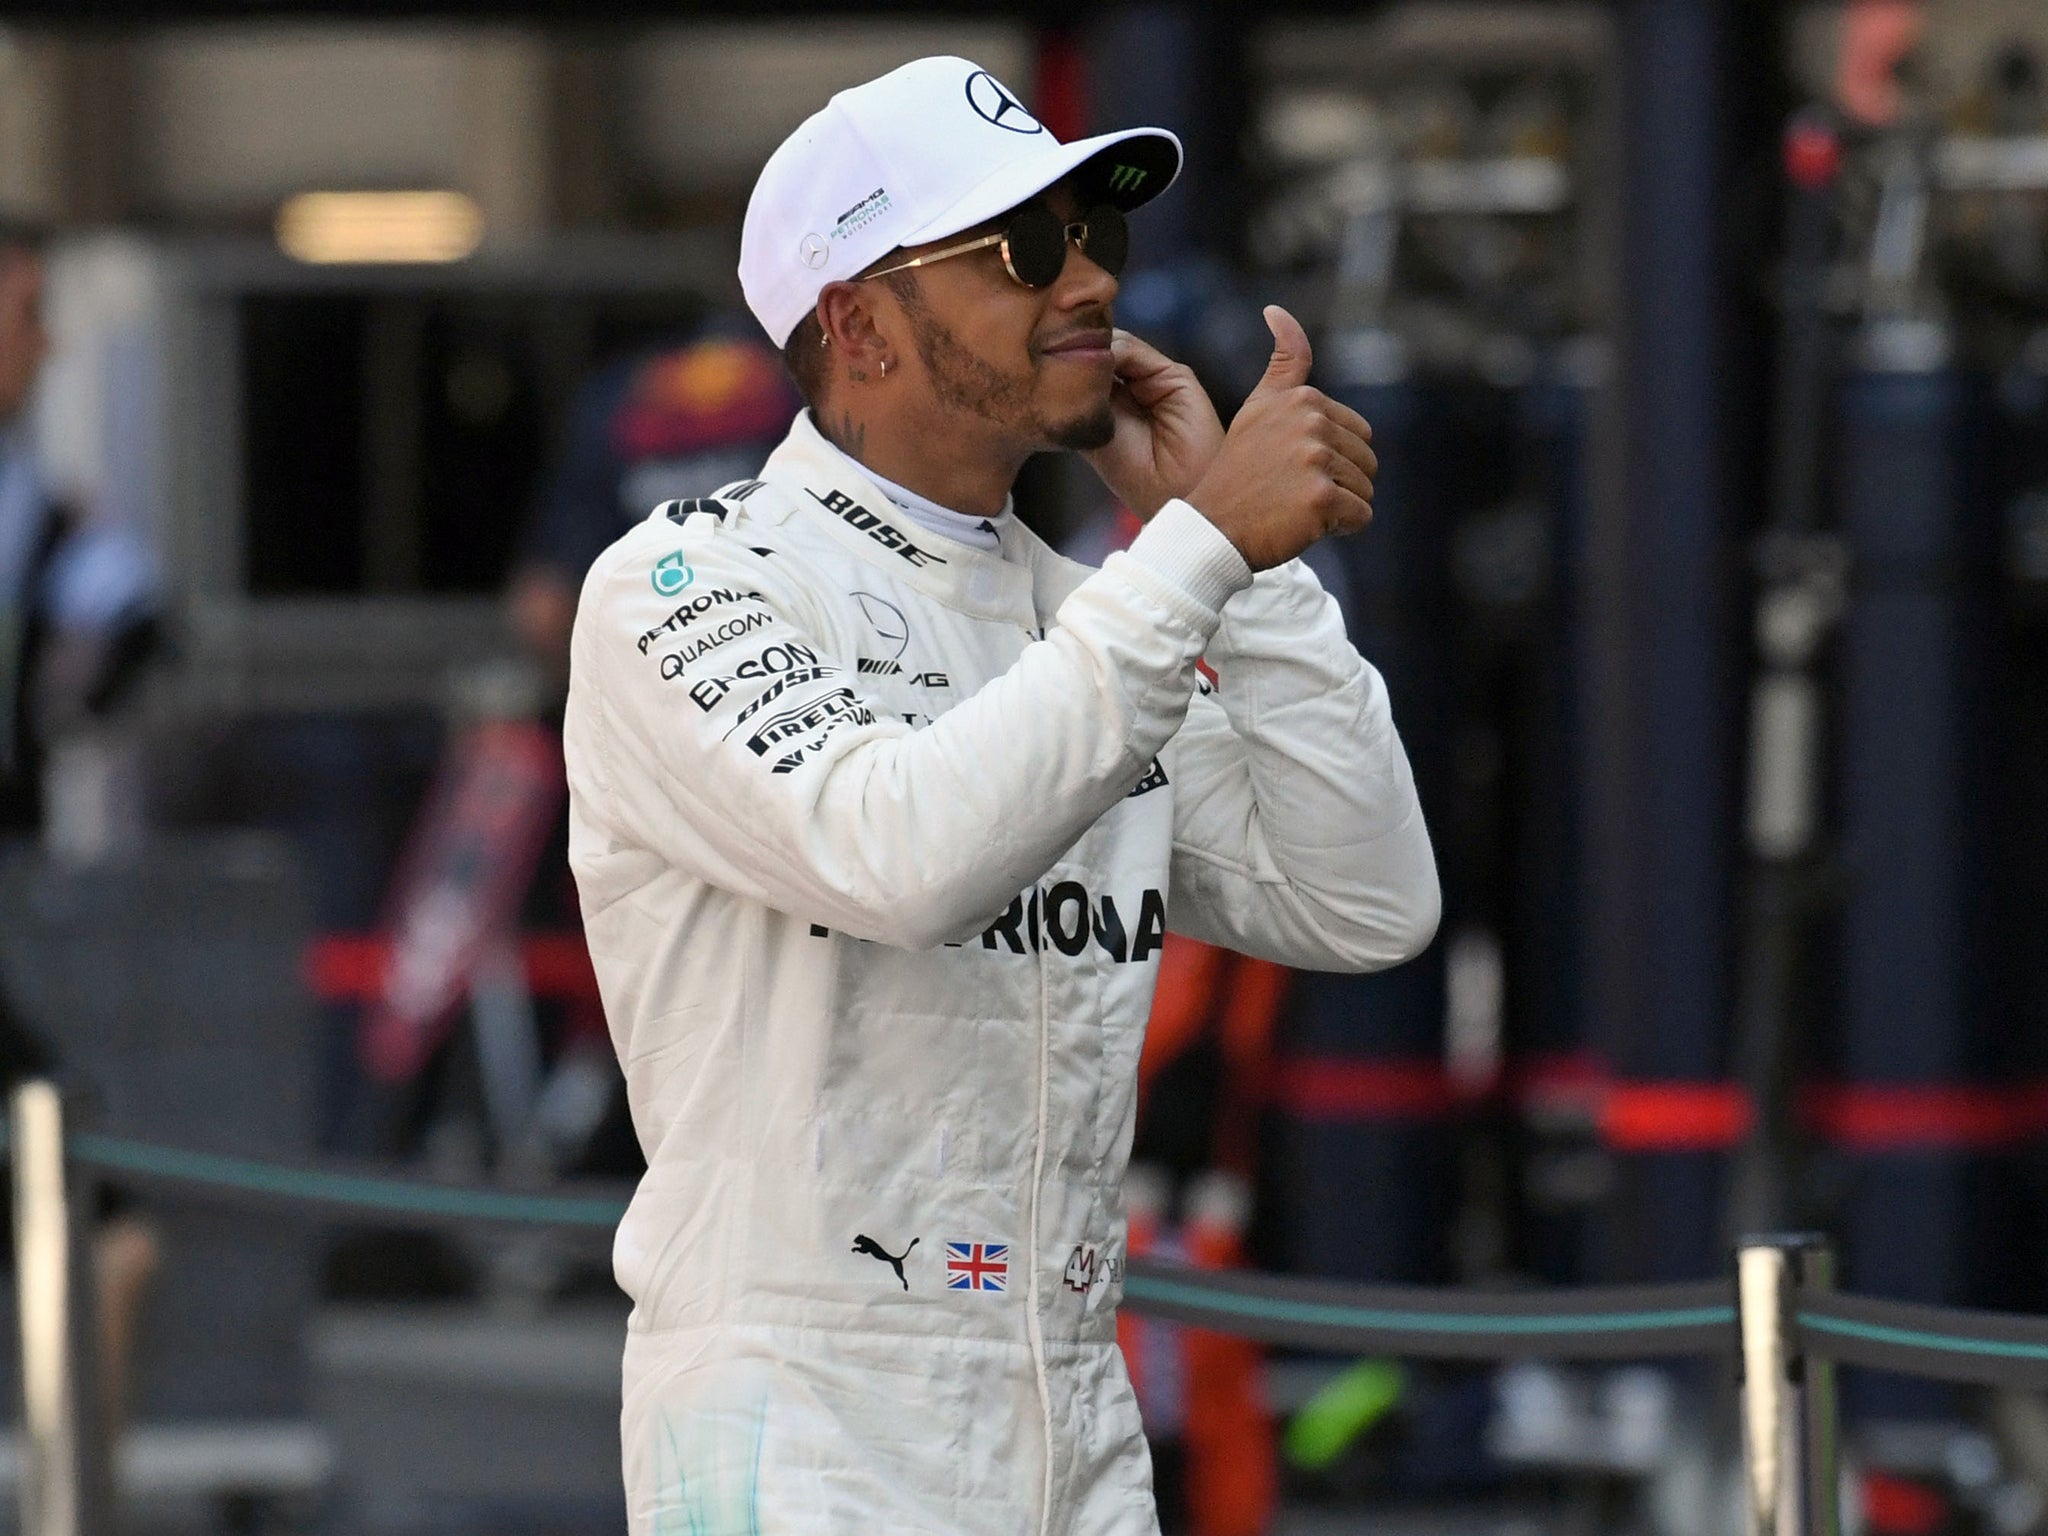 Lewis Hamilton will attempt to win a fourth world championship from third on the grid